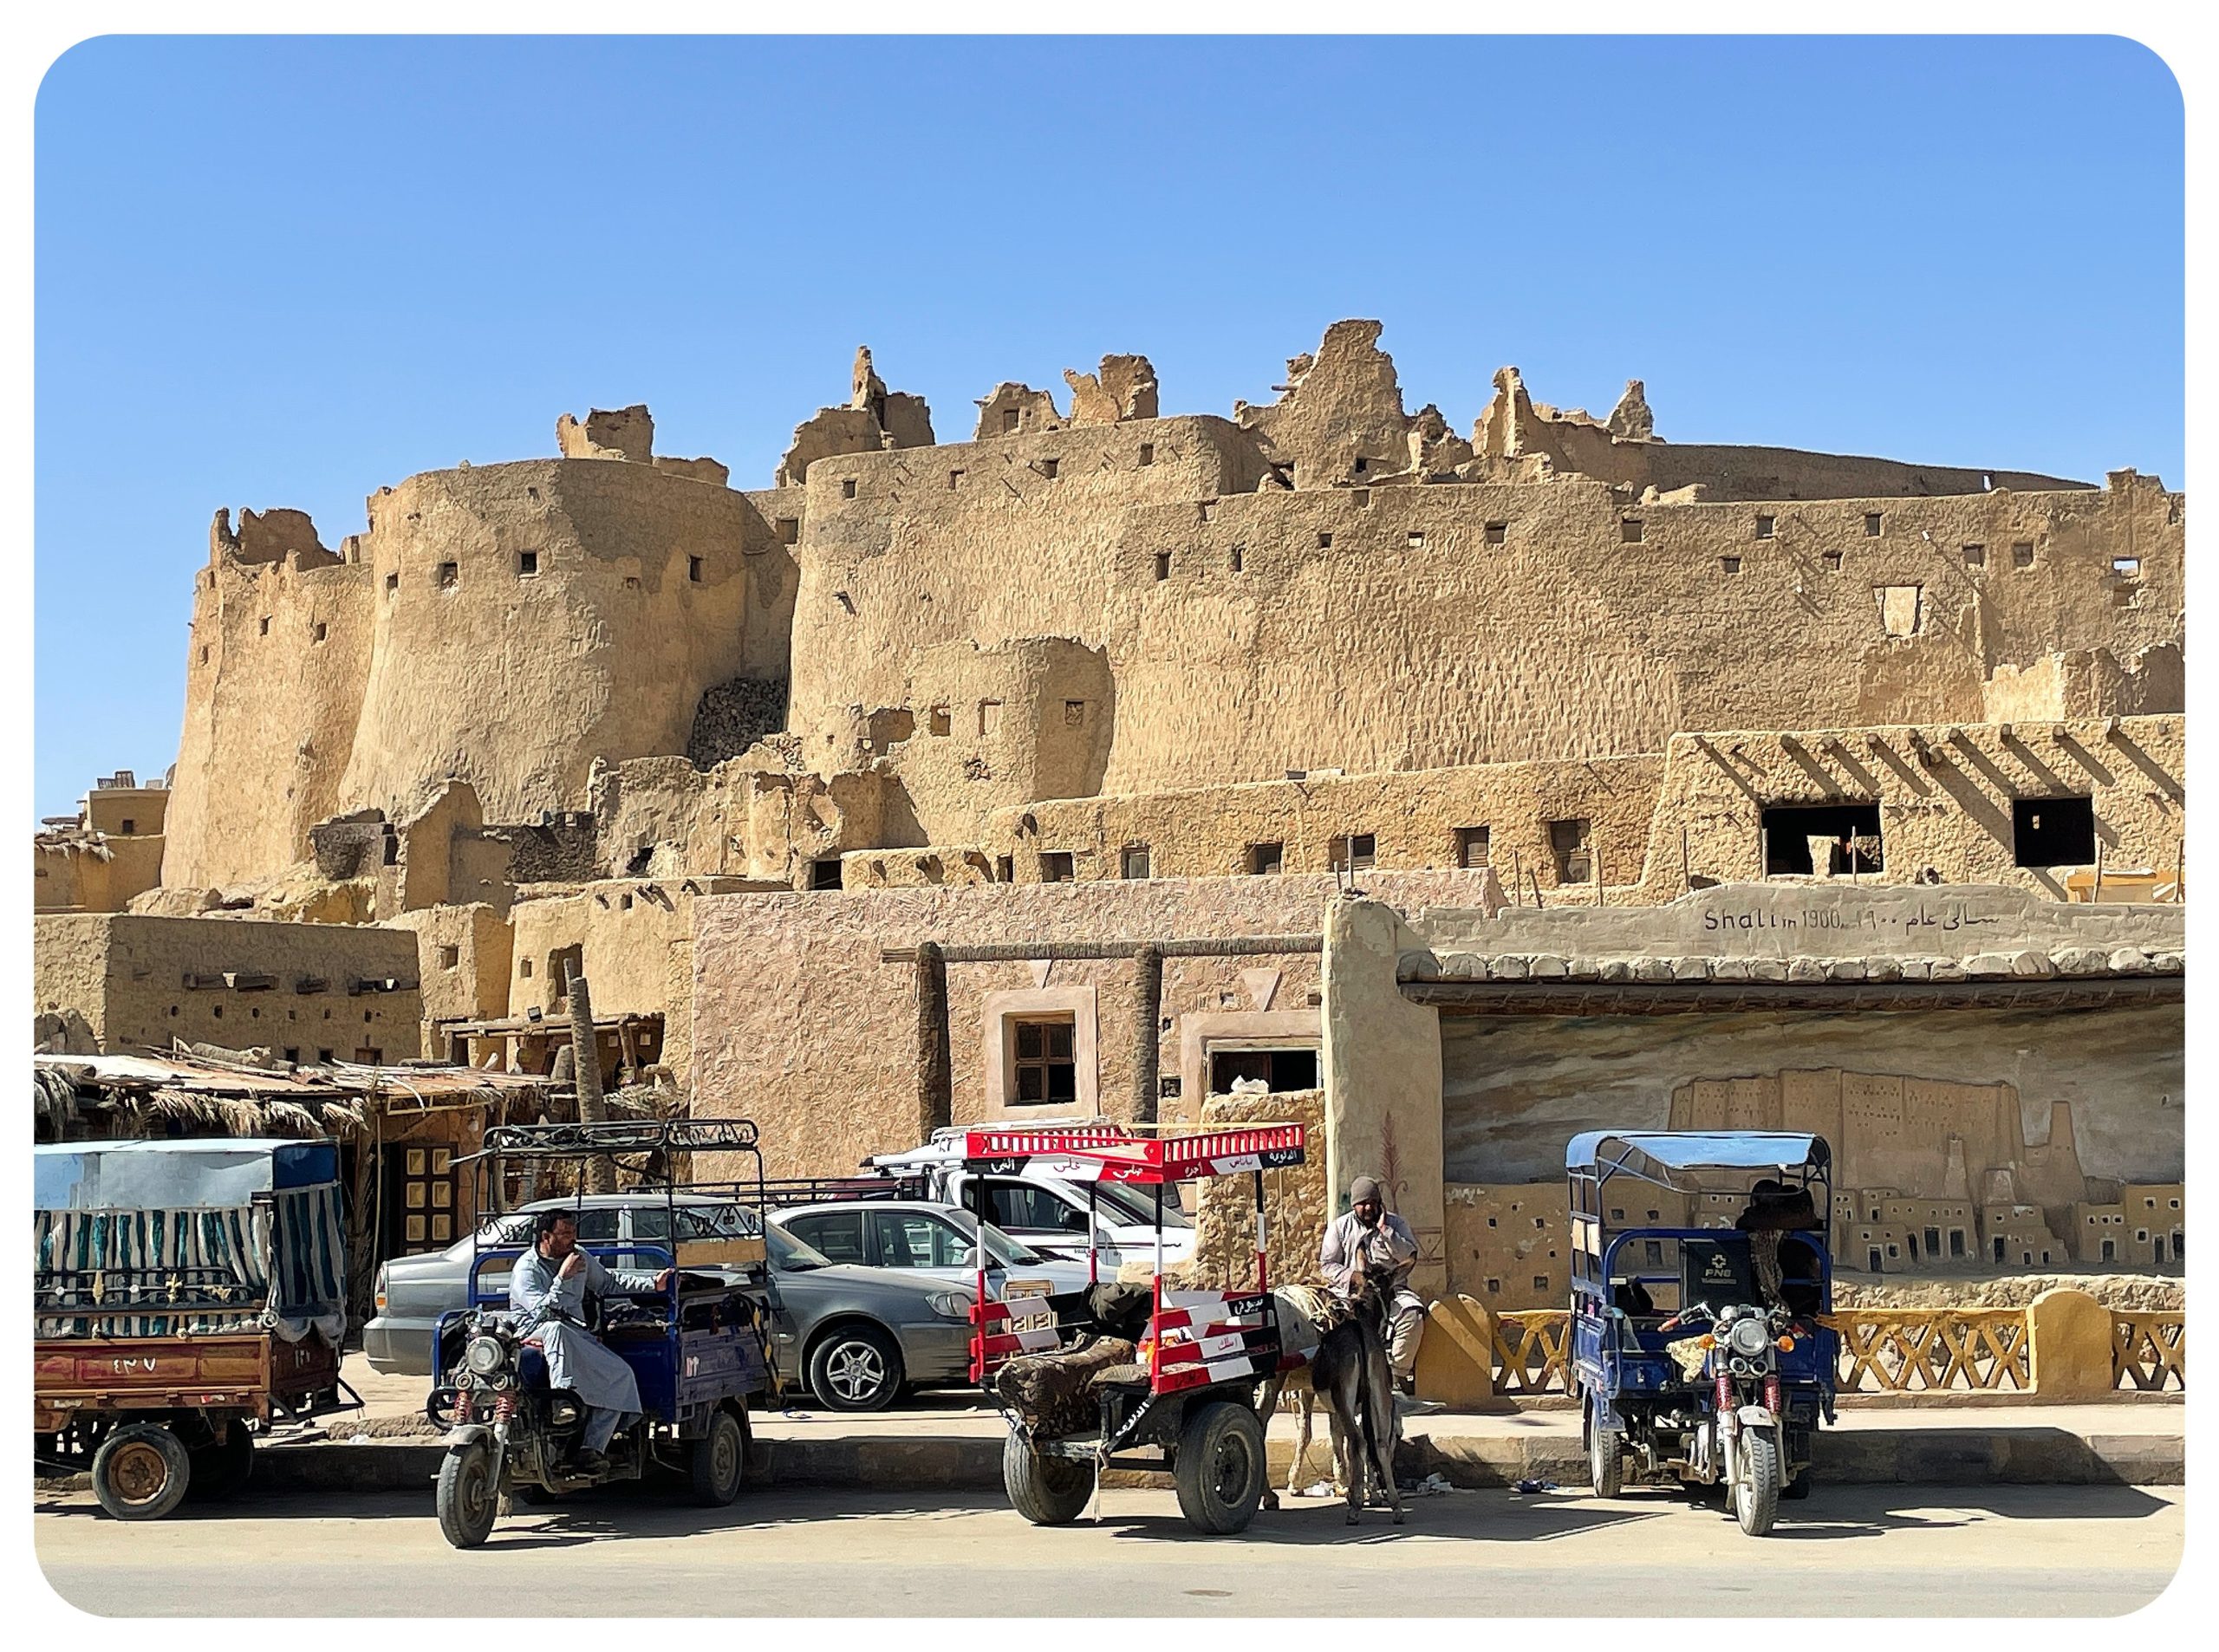 The ten best things to do in Siwa, Egypt